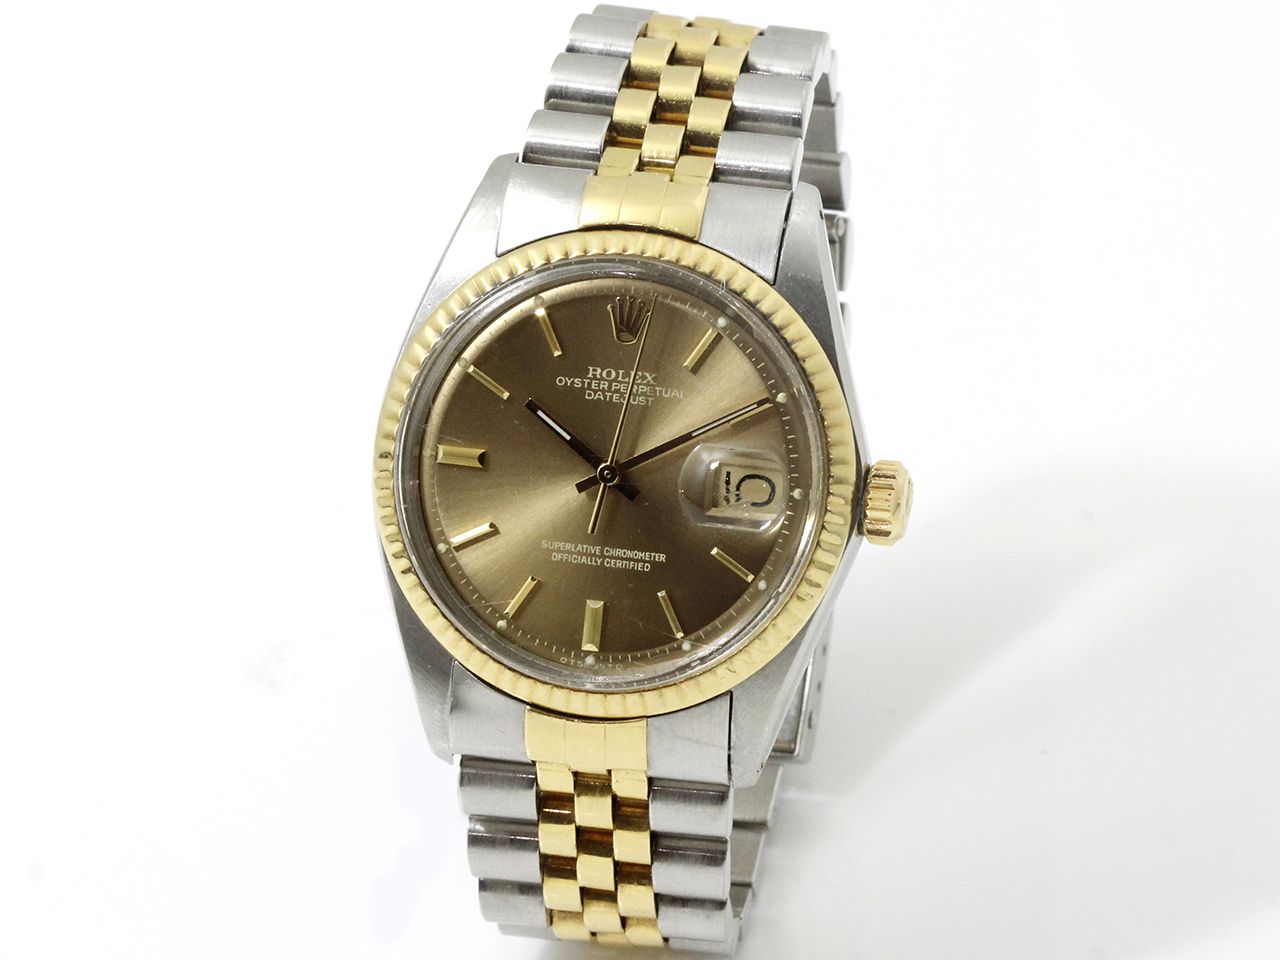 ROLEX ''OYSTER PERPETUAL DATEJUST'' 
Men's wristwatch in gold (750) and steel.

&hellip;